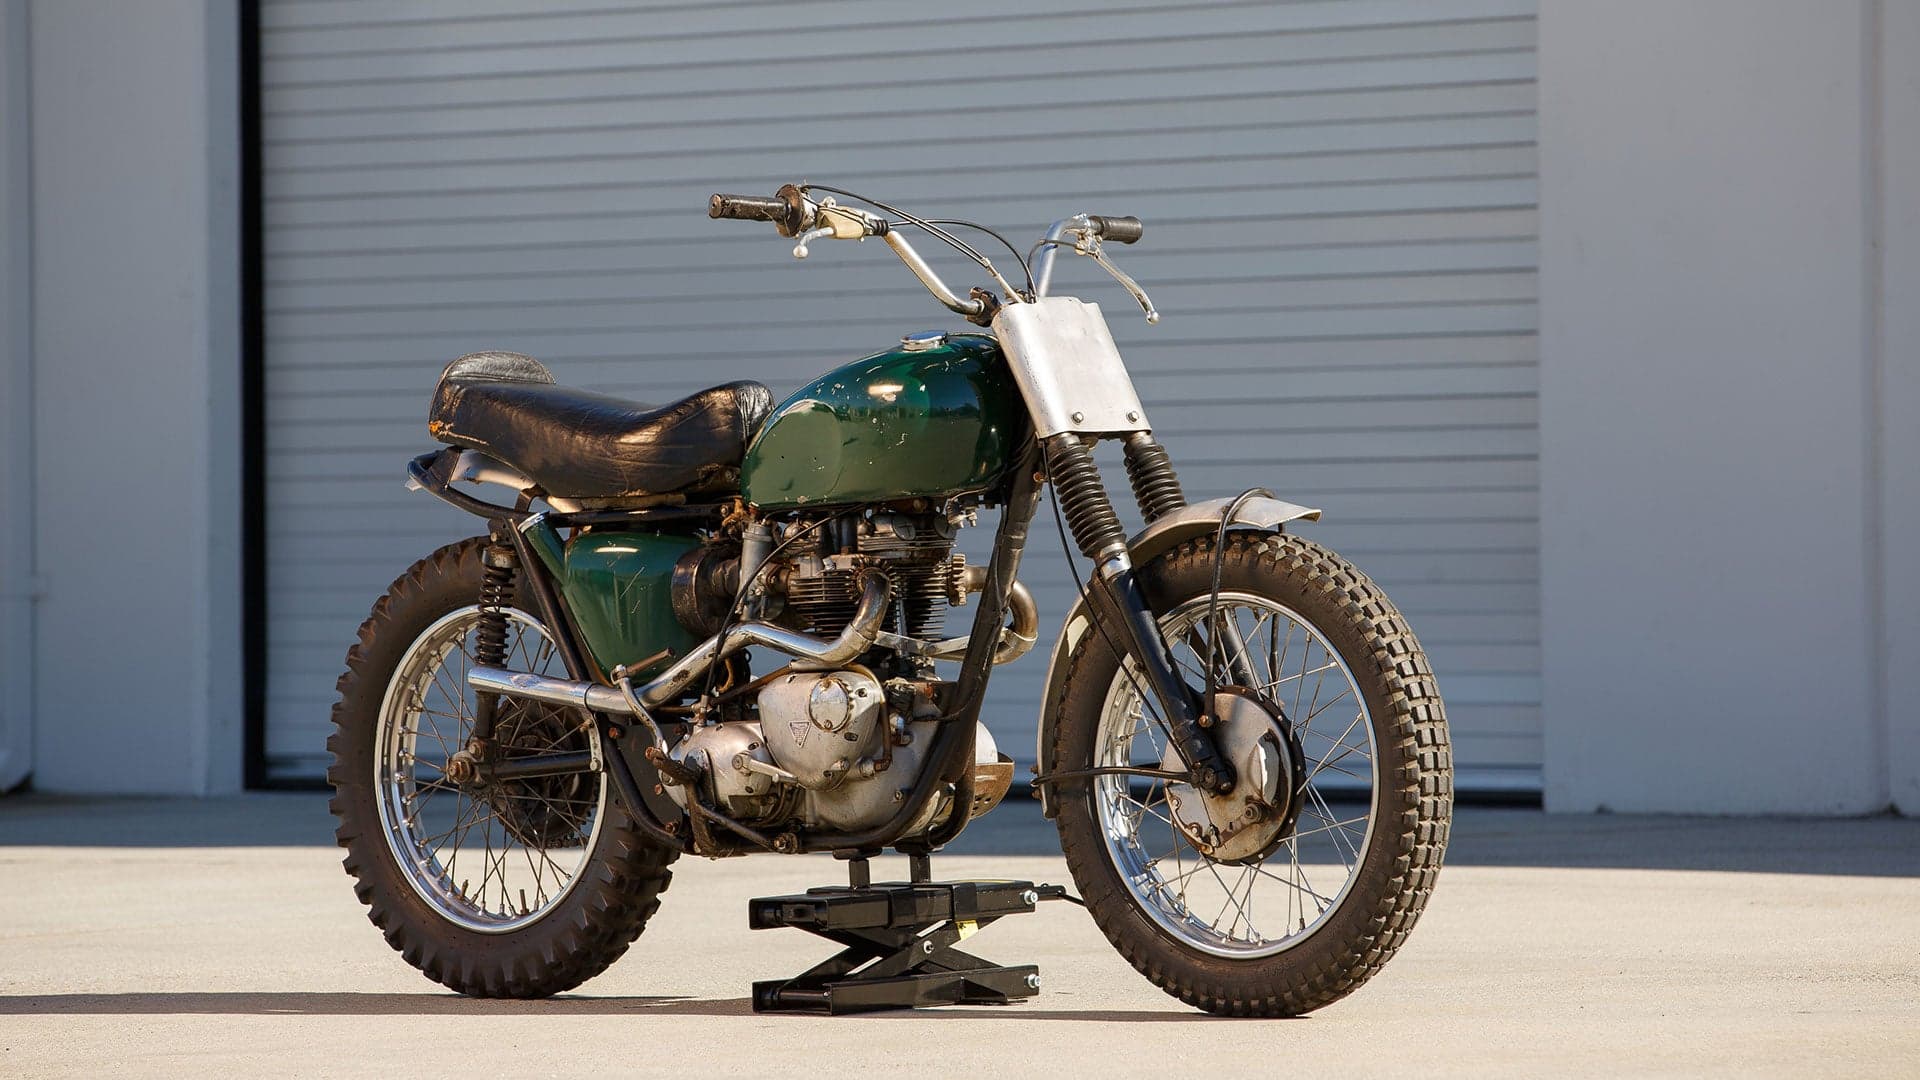 This Old Triumph Motorcycle Is Pure McQueen